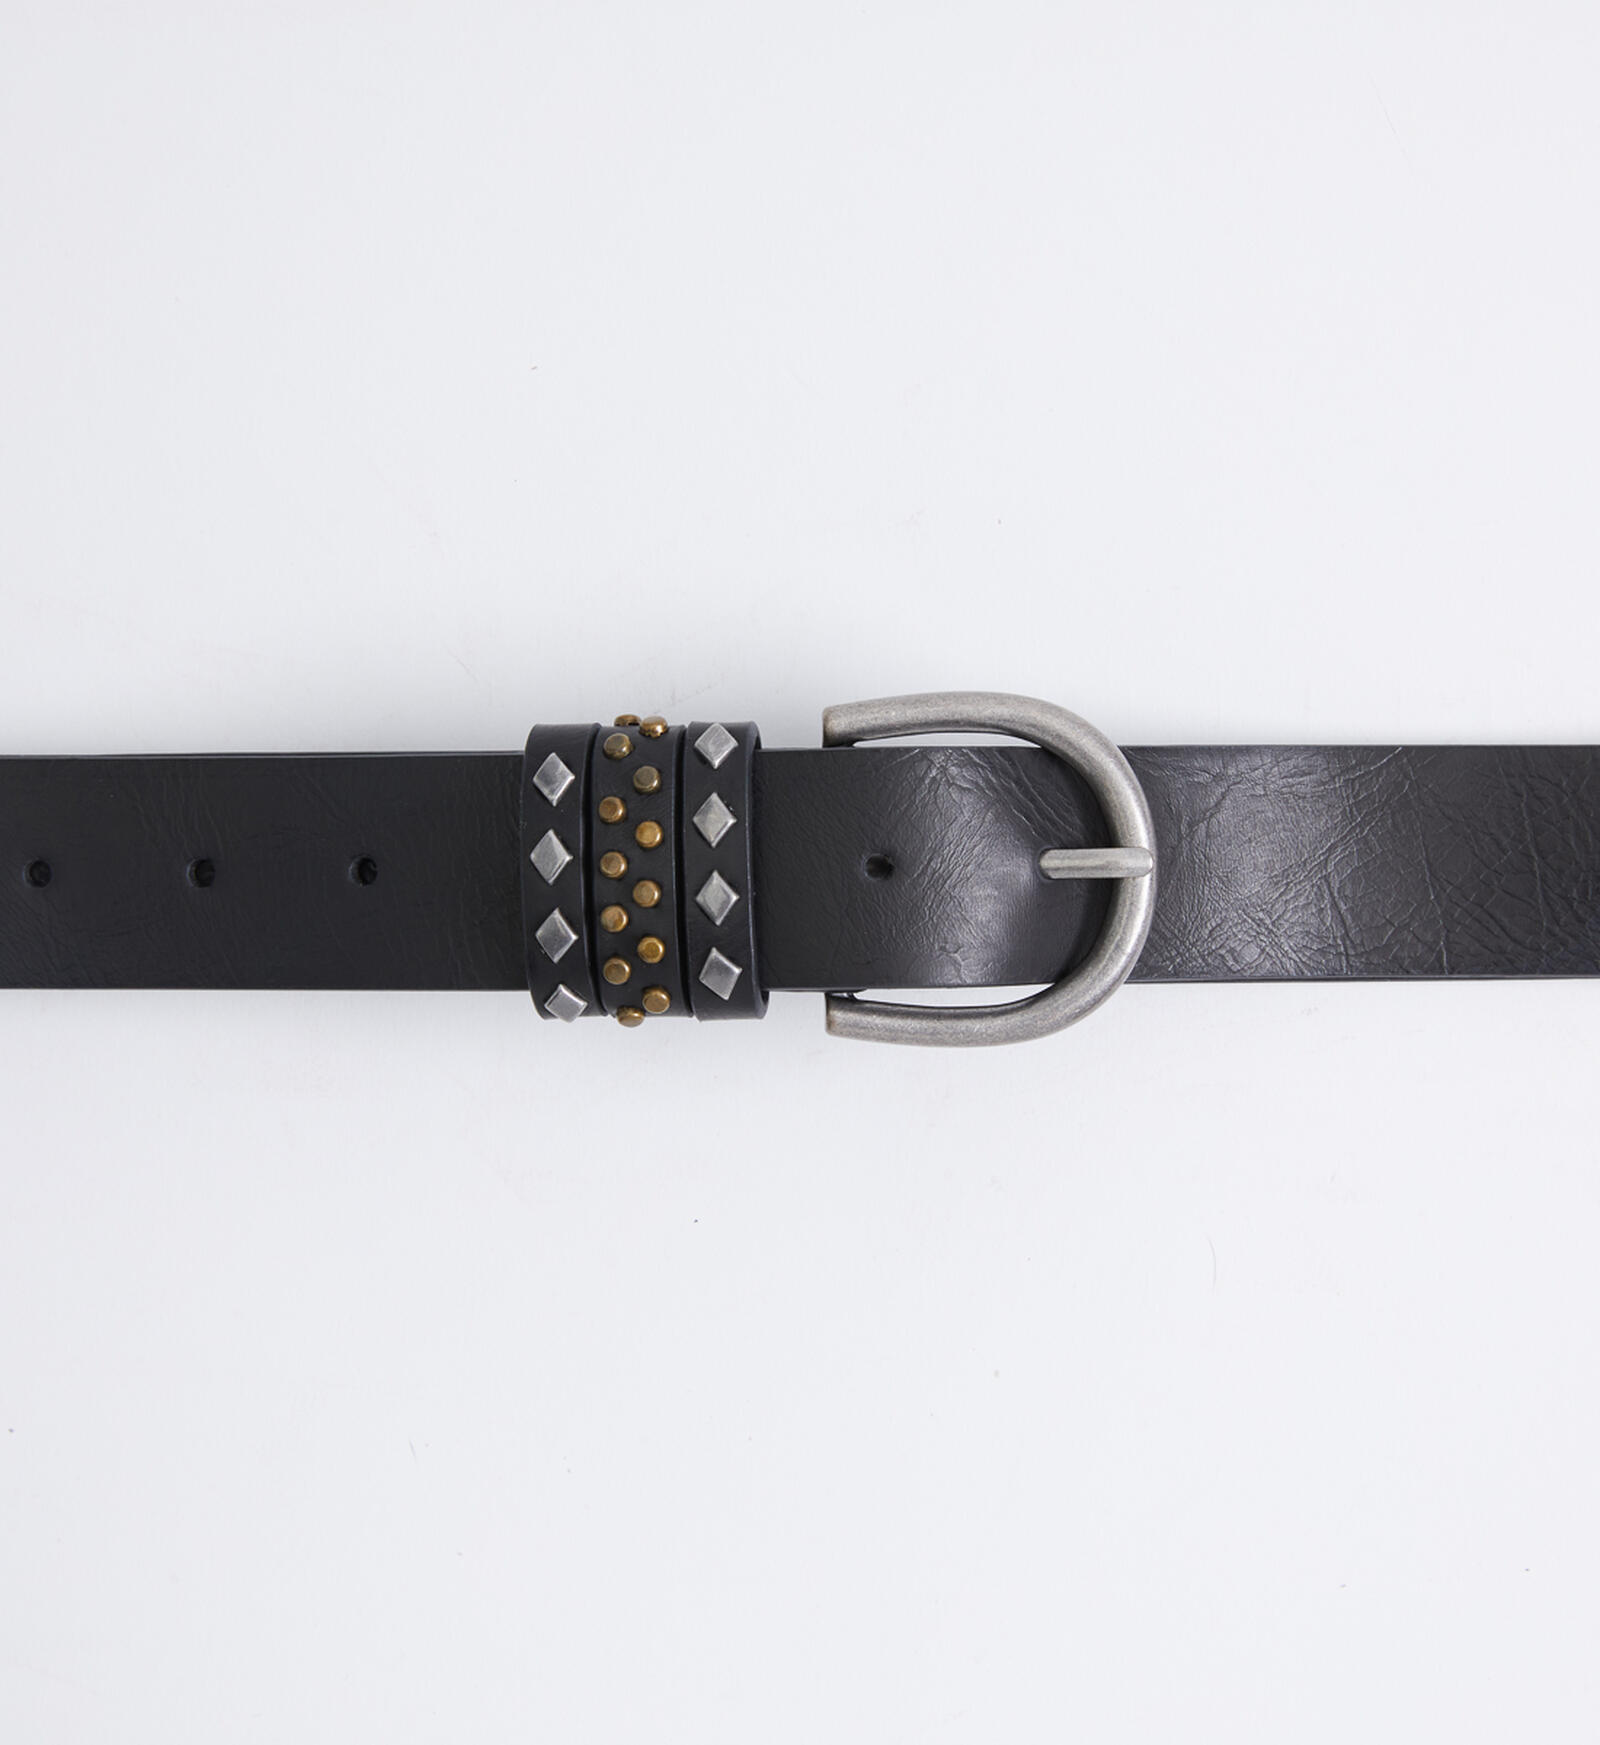 Studded leather belt in black - Our Legacy